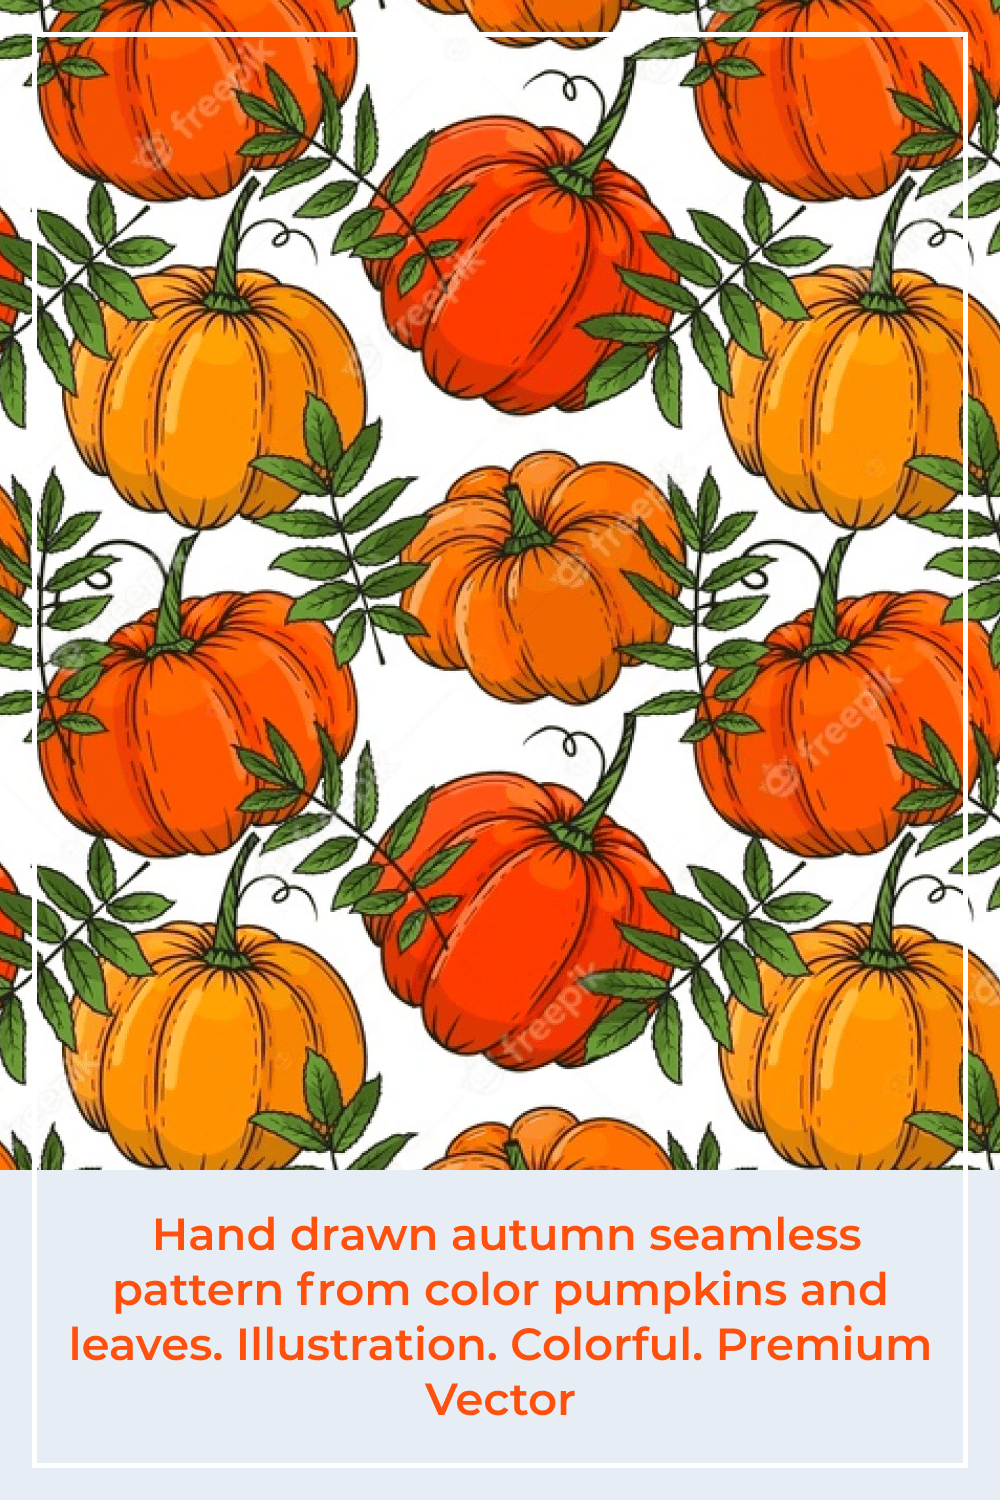 Hand drawn autumn seamless pattern from color pumpkins and leaves.